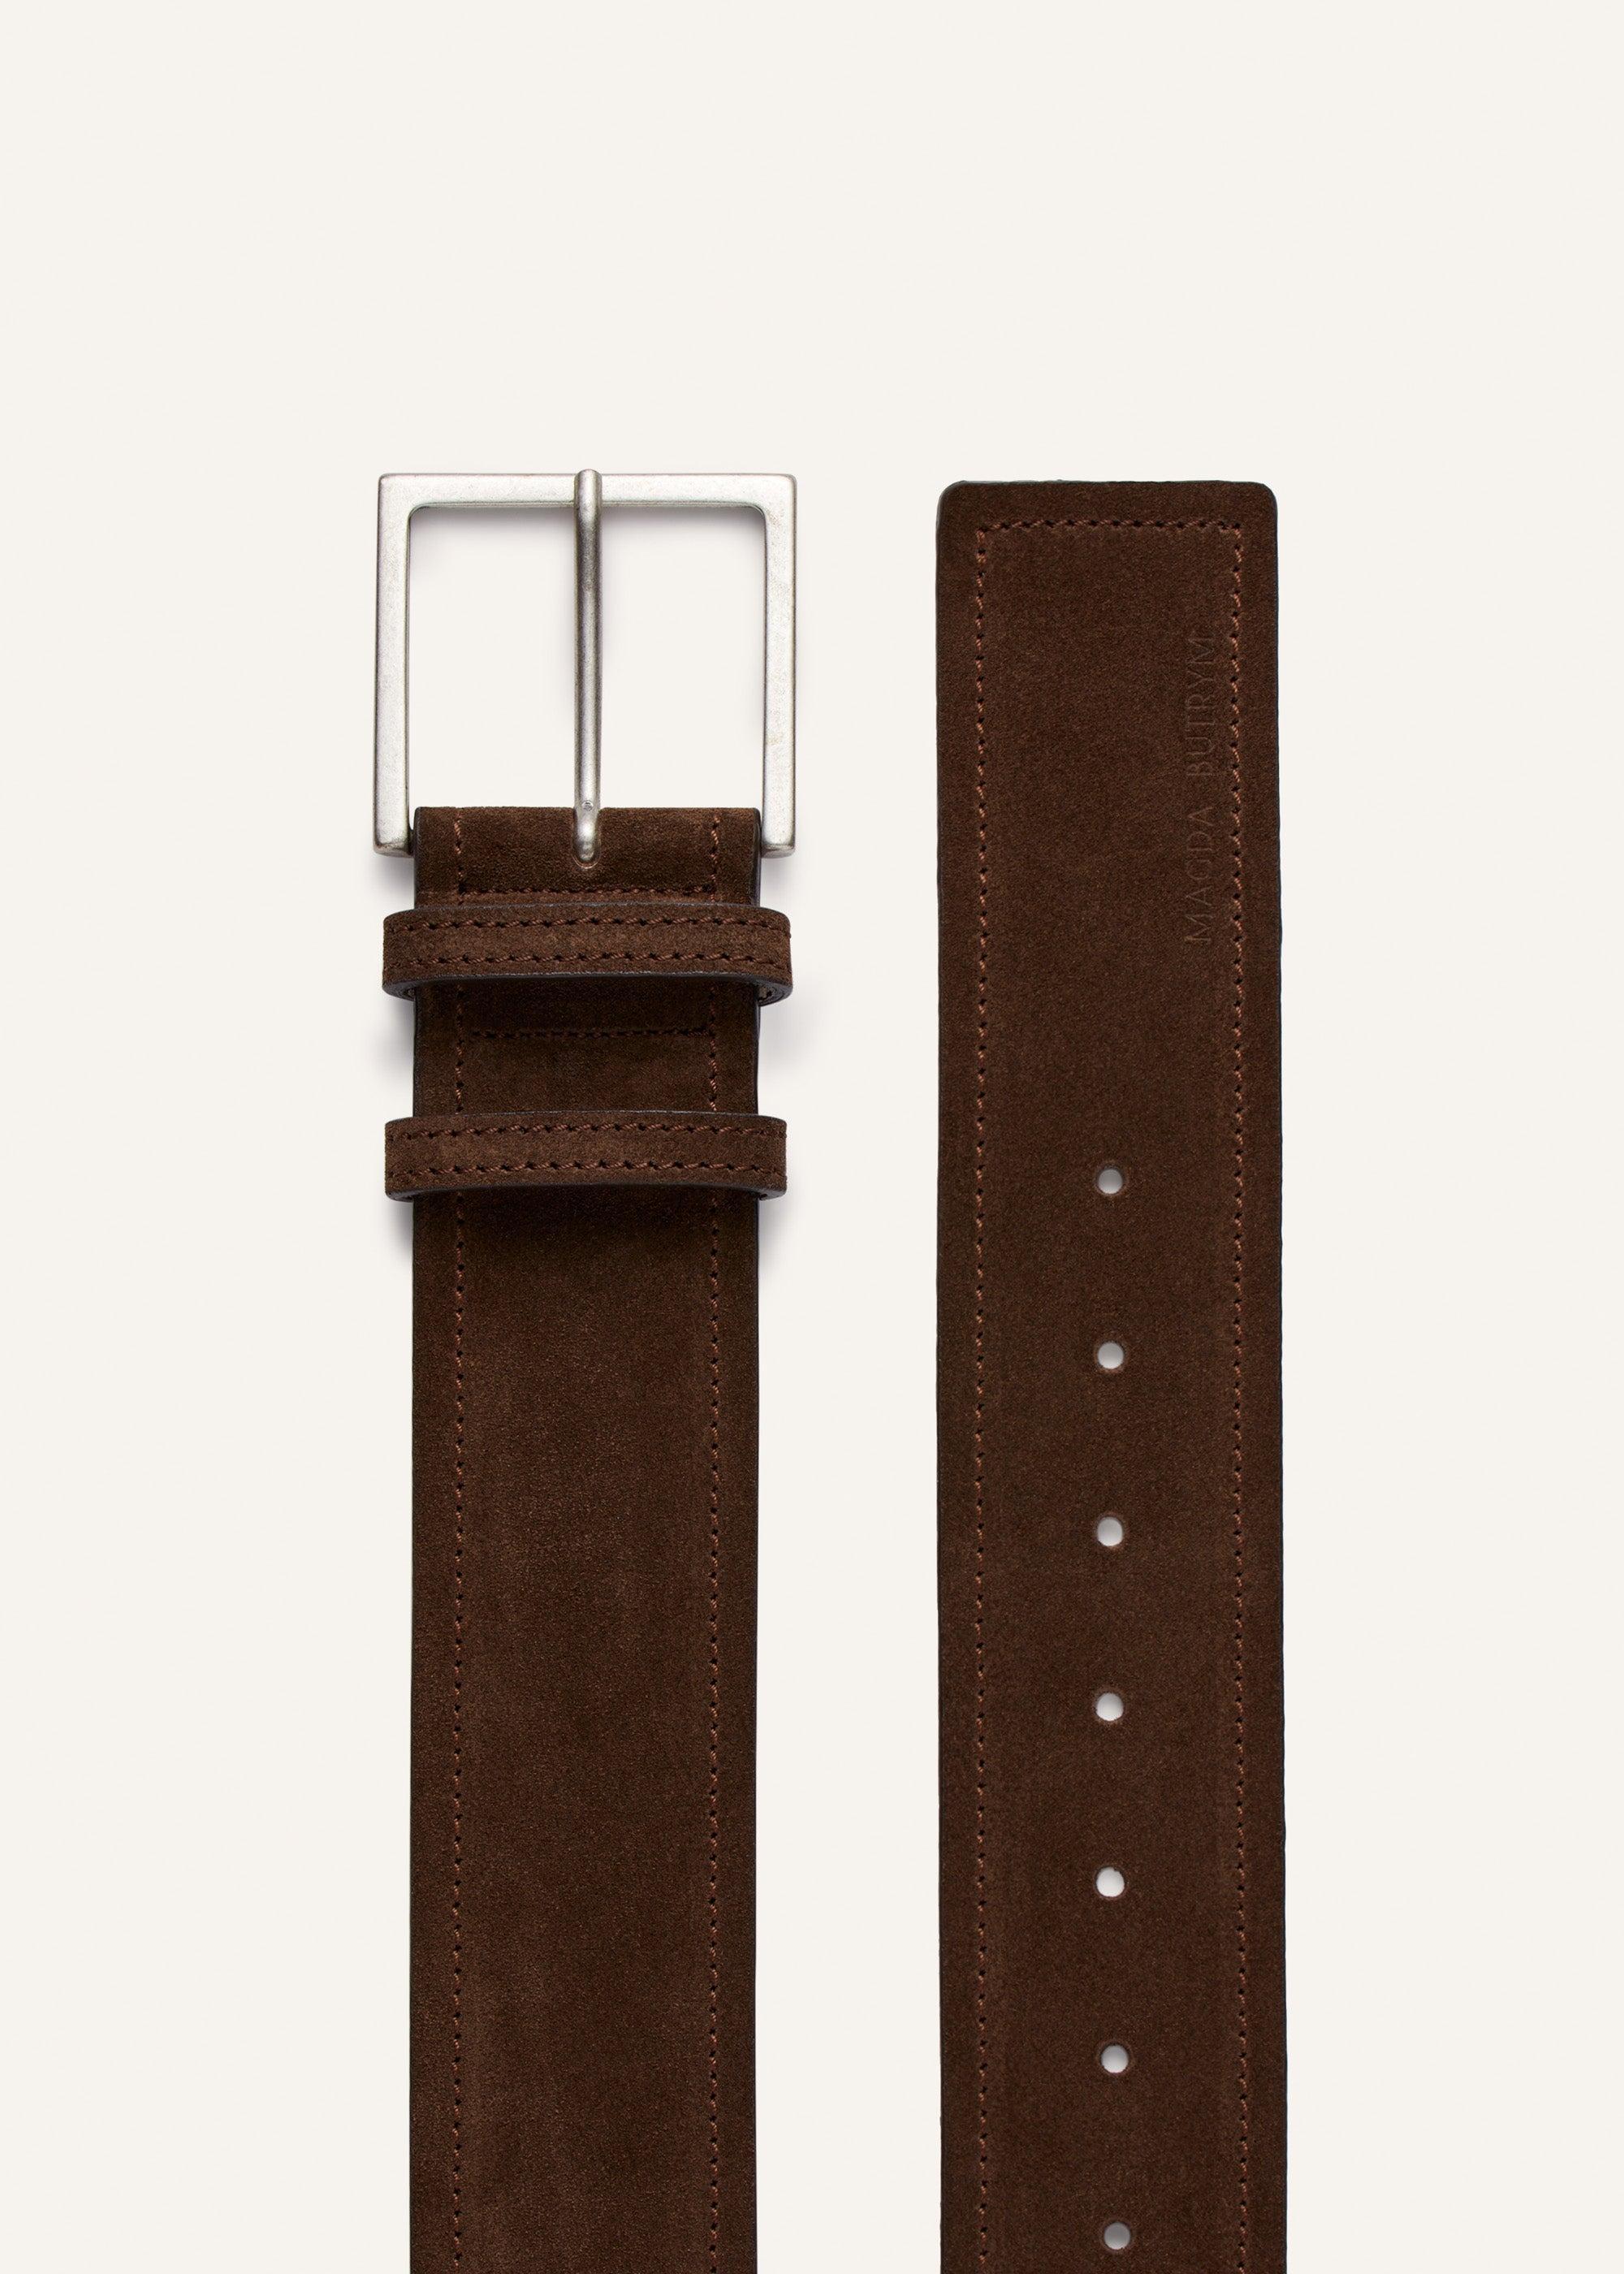 Wide leather belt in brown suede with contrast stitching Product Image